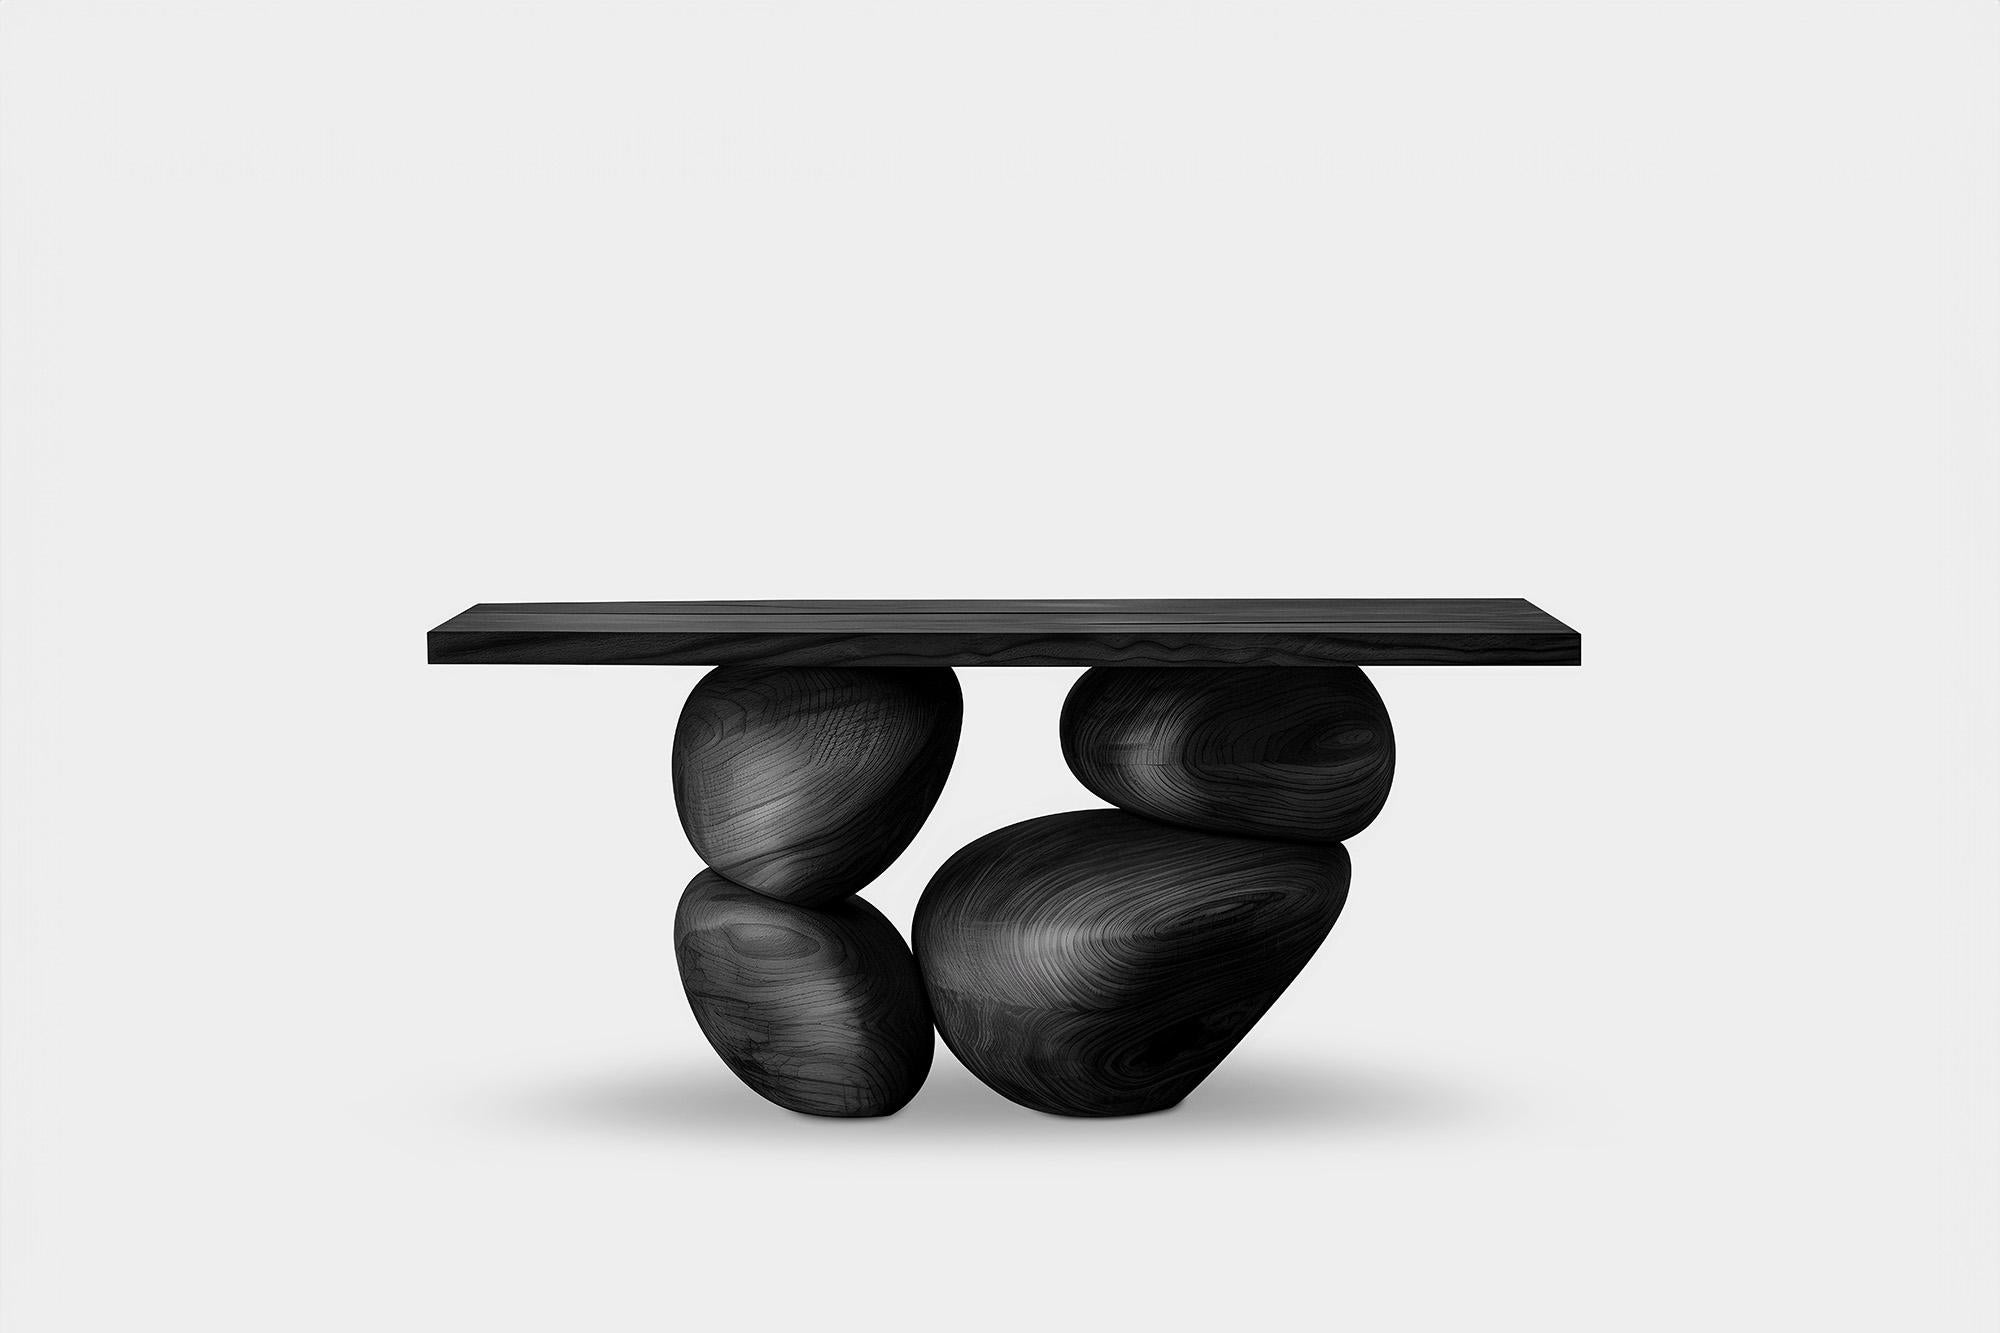 NONO Elefante Table 32, Swirl Base, Joel Escalona Signature

—————————————————————
Elefante Collection: A Harmony of Design and Heritage by NONO

Crafting Elegance with a Modernist Touch

NONO, renowned for its decade-long journey in redefining